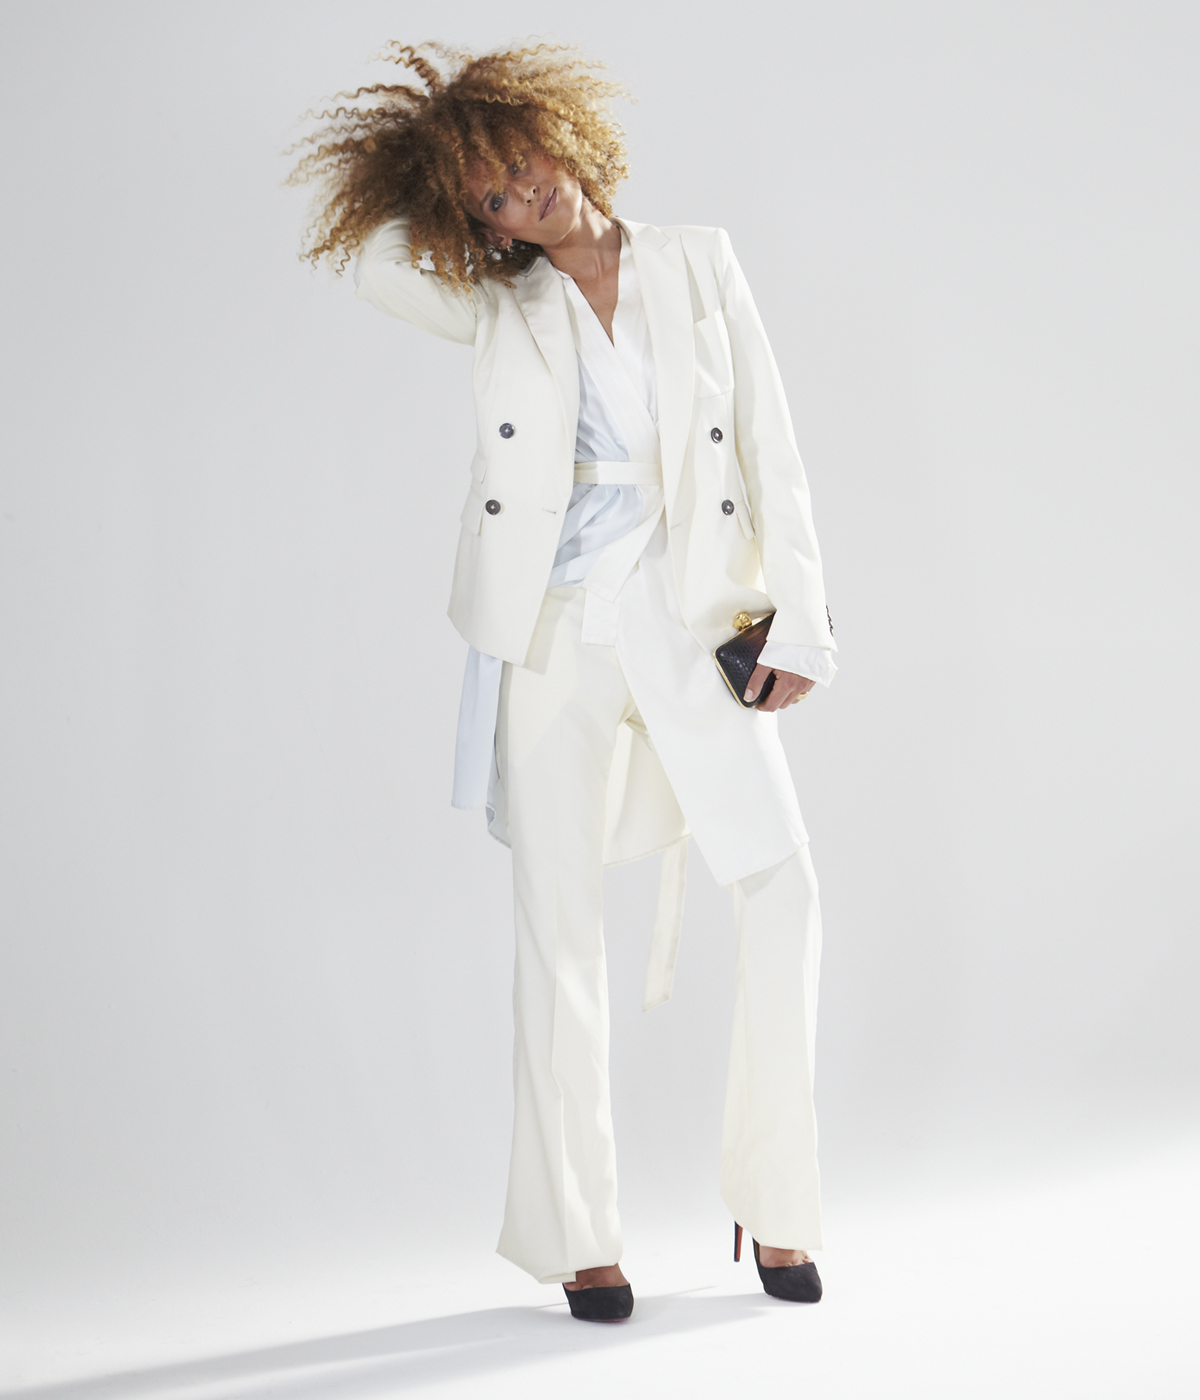 lady's fashion photography with a white suit